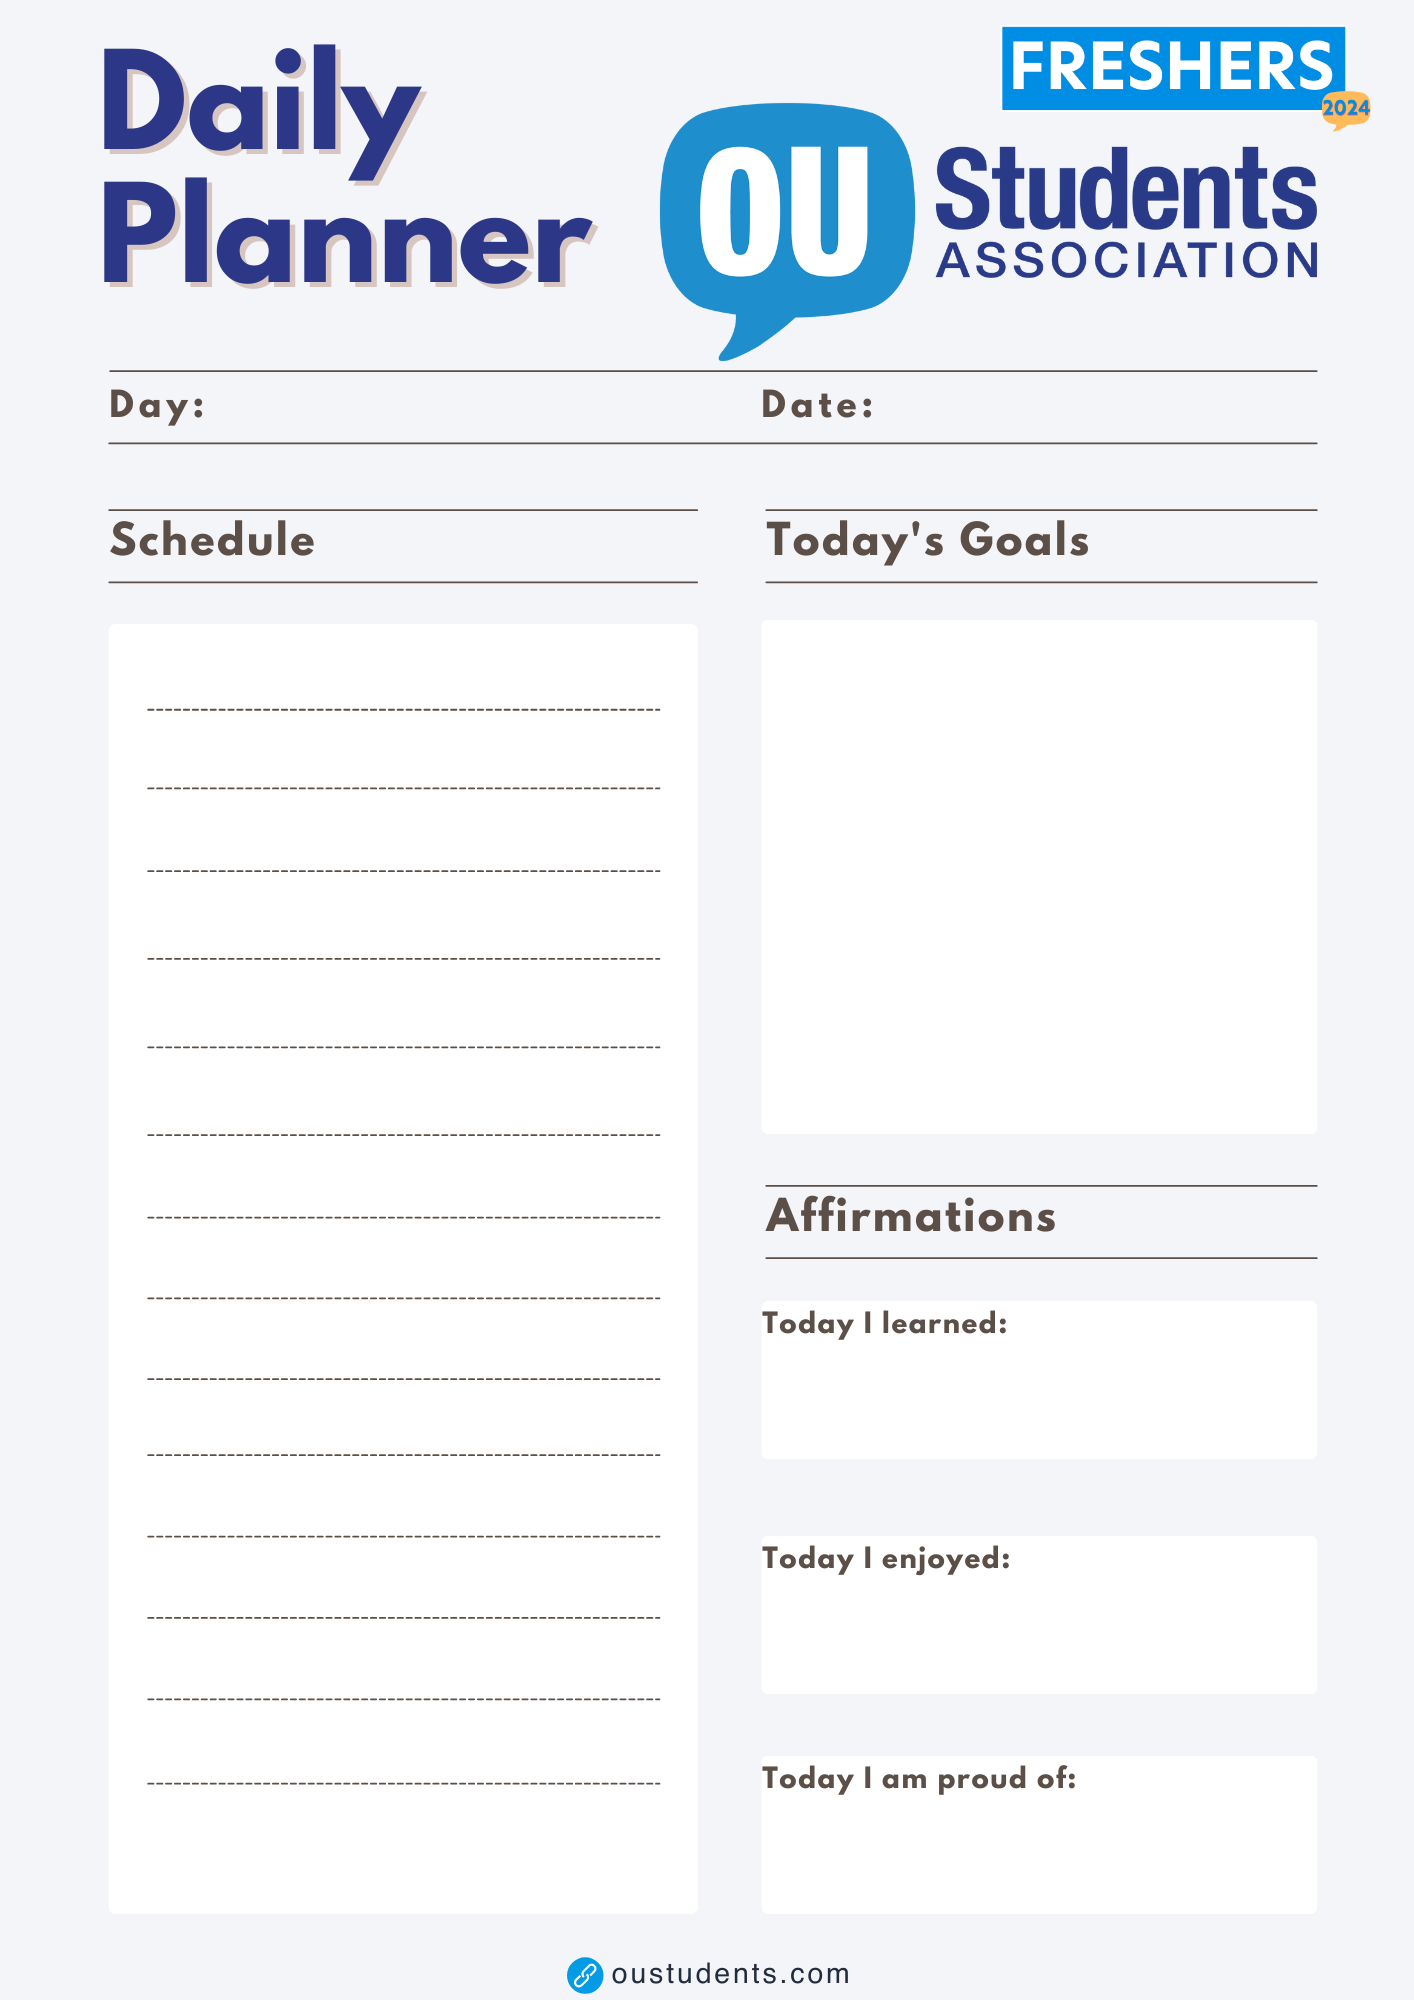 Image shows a daily planner design with the Freshers 2024 logo in the top left corner